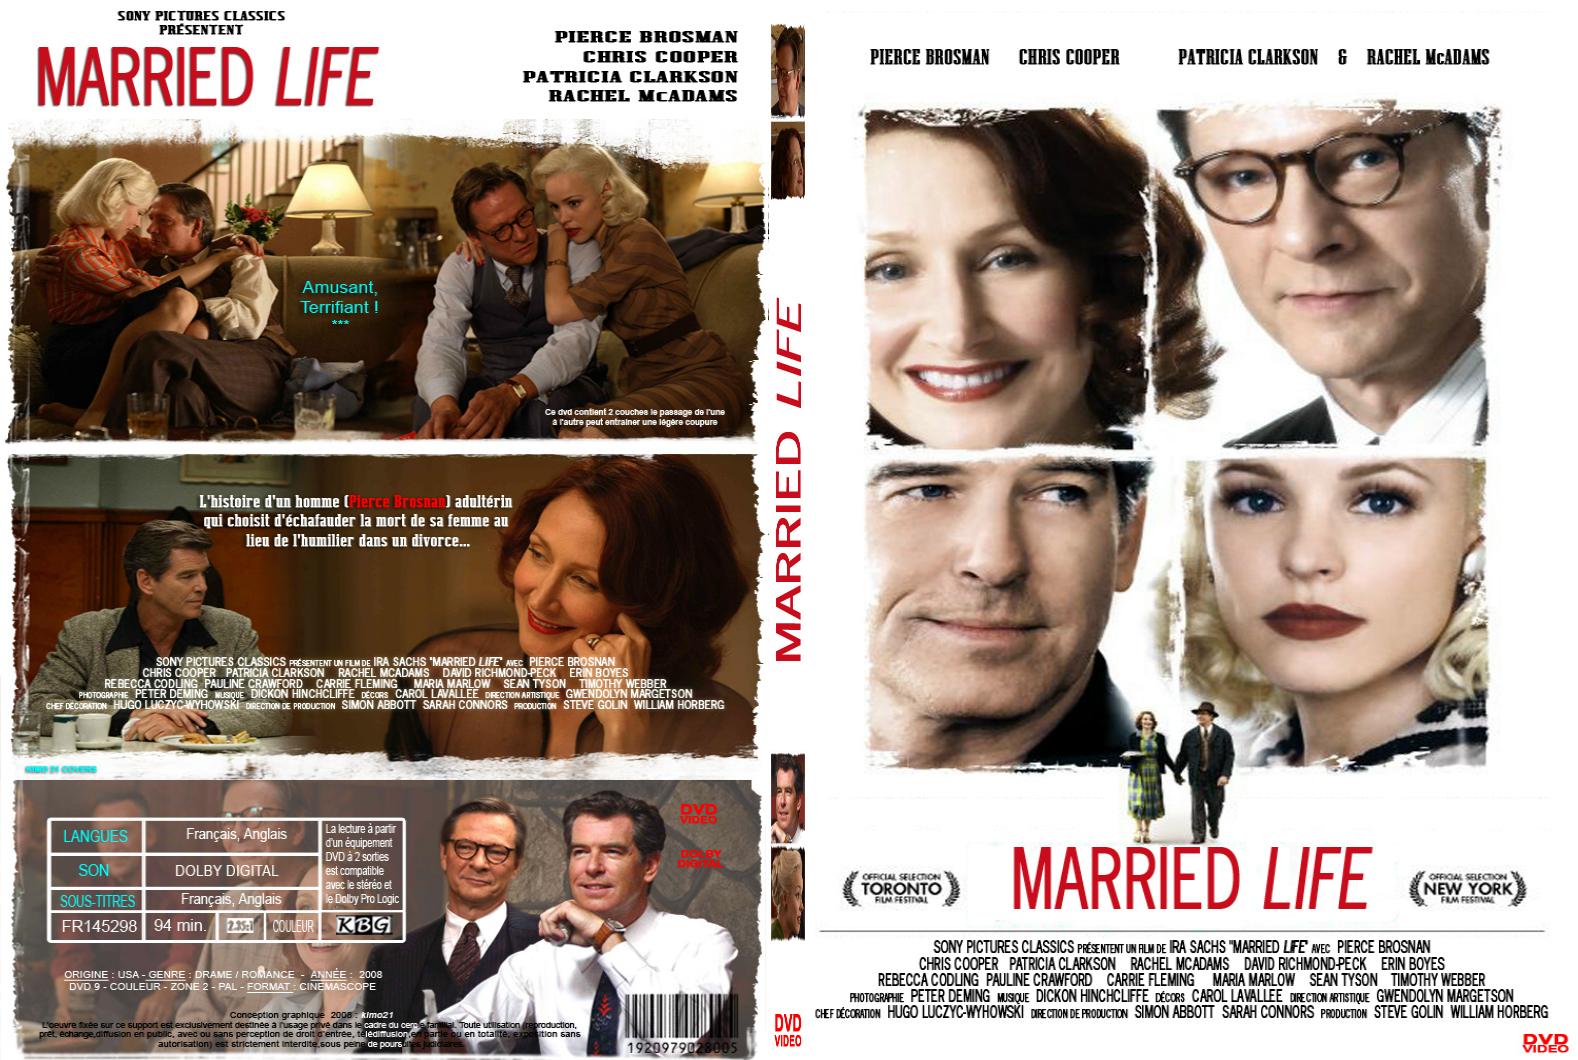 Jaquette DVD Married life - SLIM